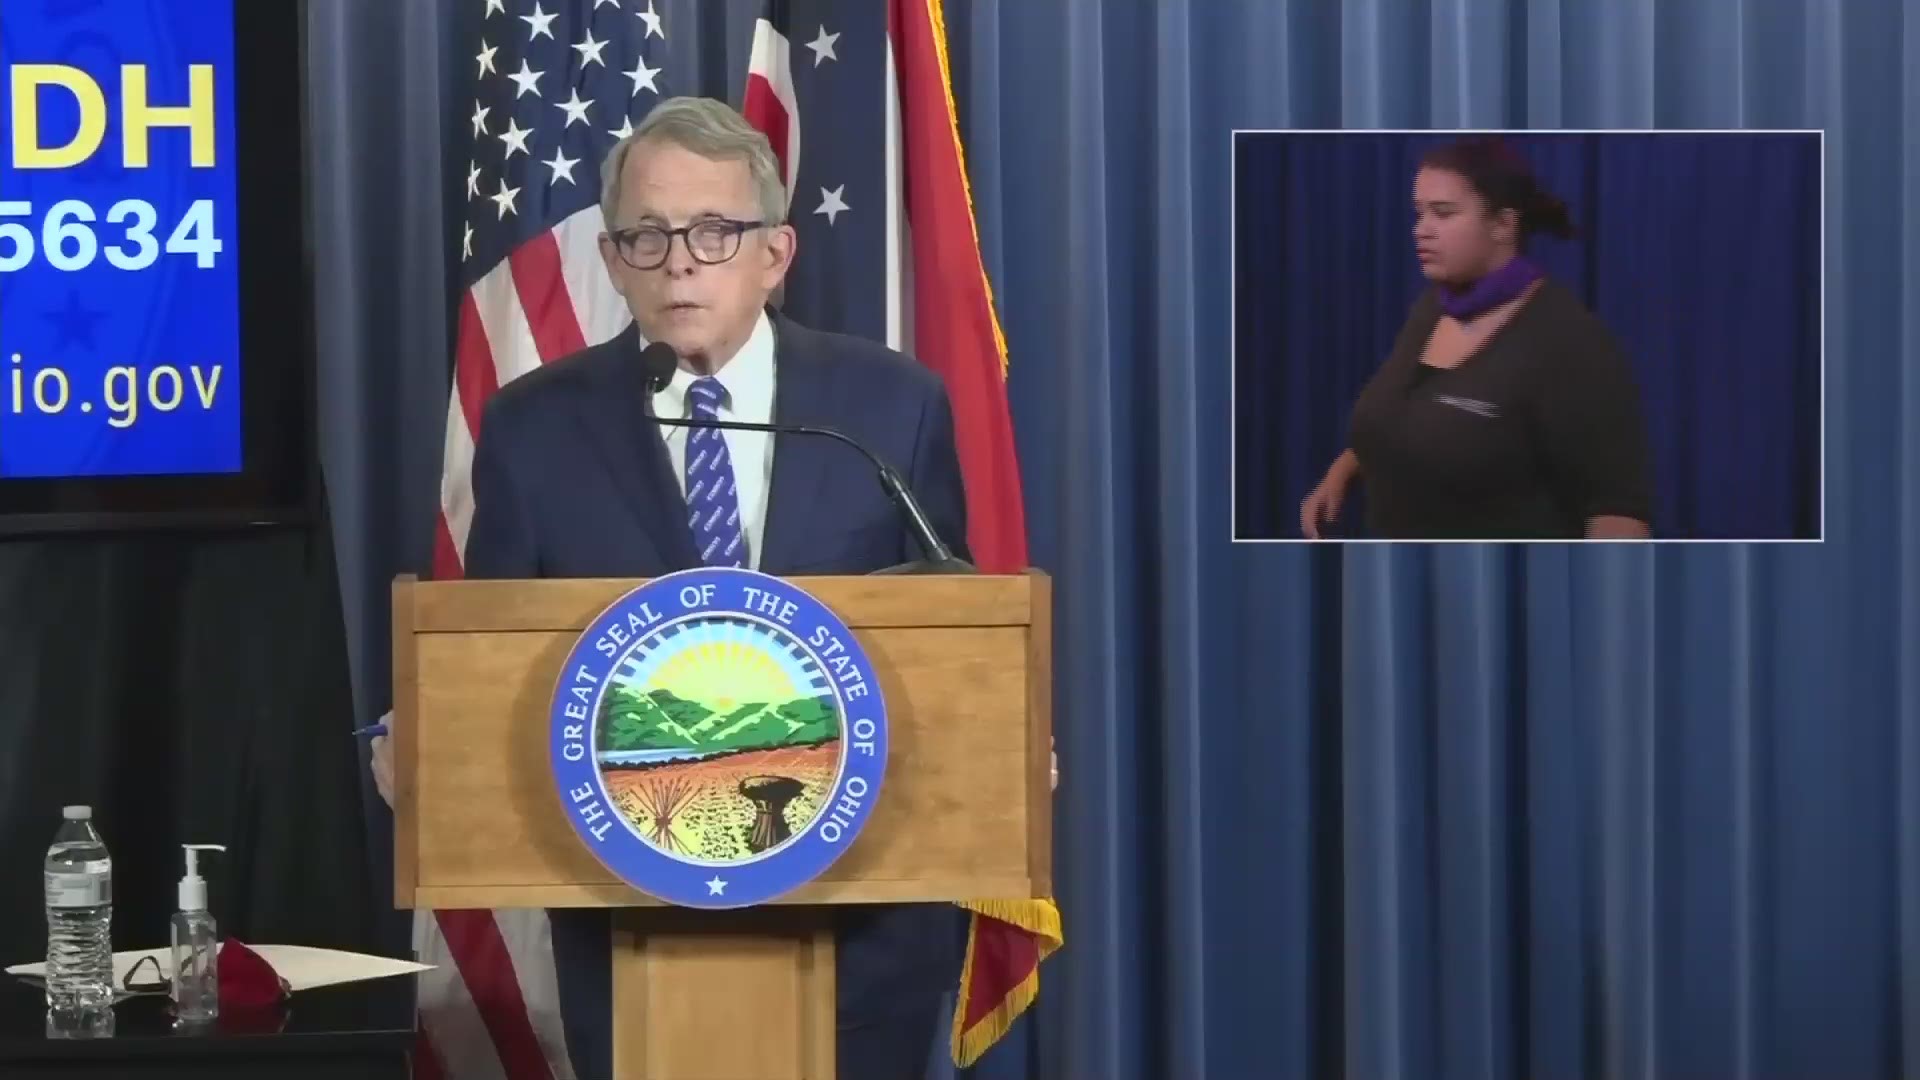 Ohio Governor Mike DeWine said he wouldn't support the repealing of the bill that's at the center of a federal bribery case.